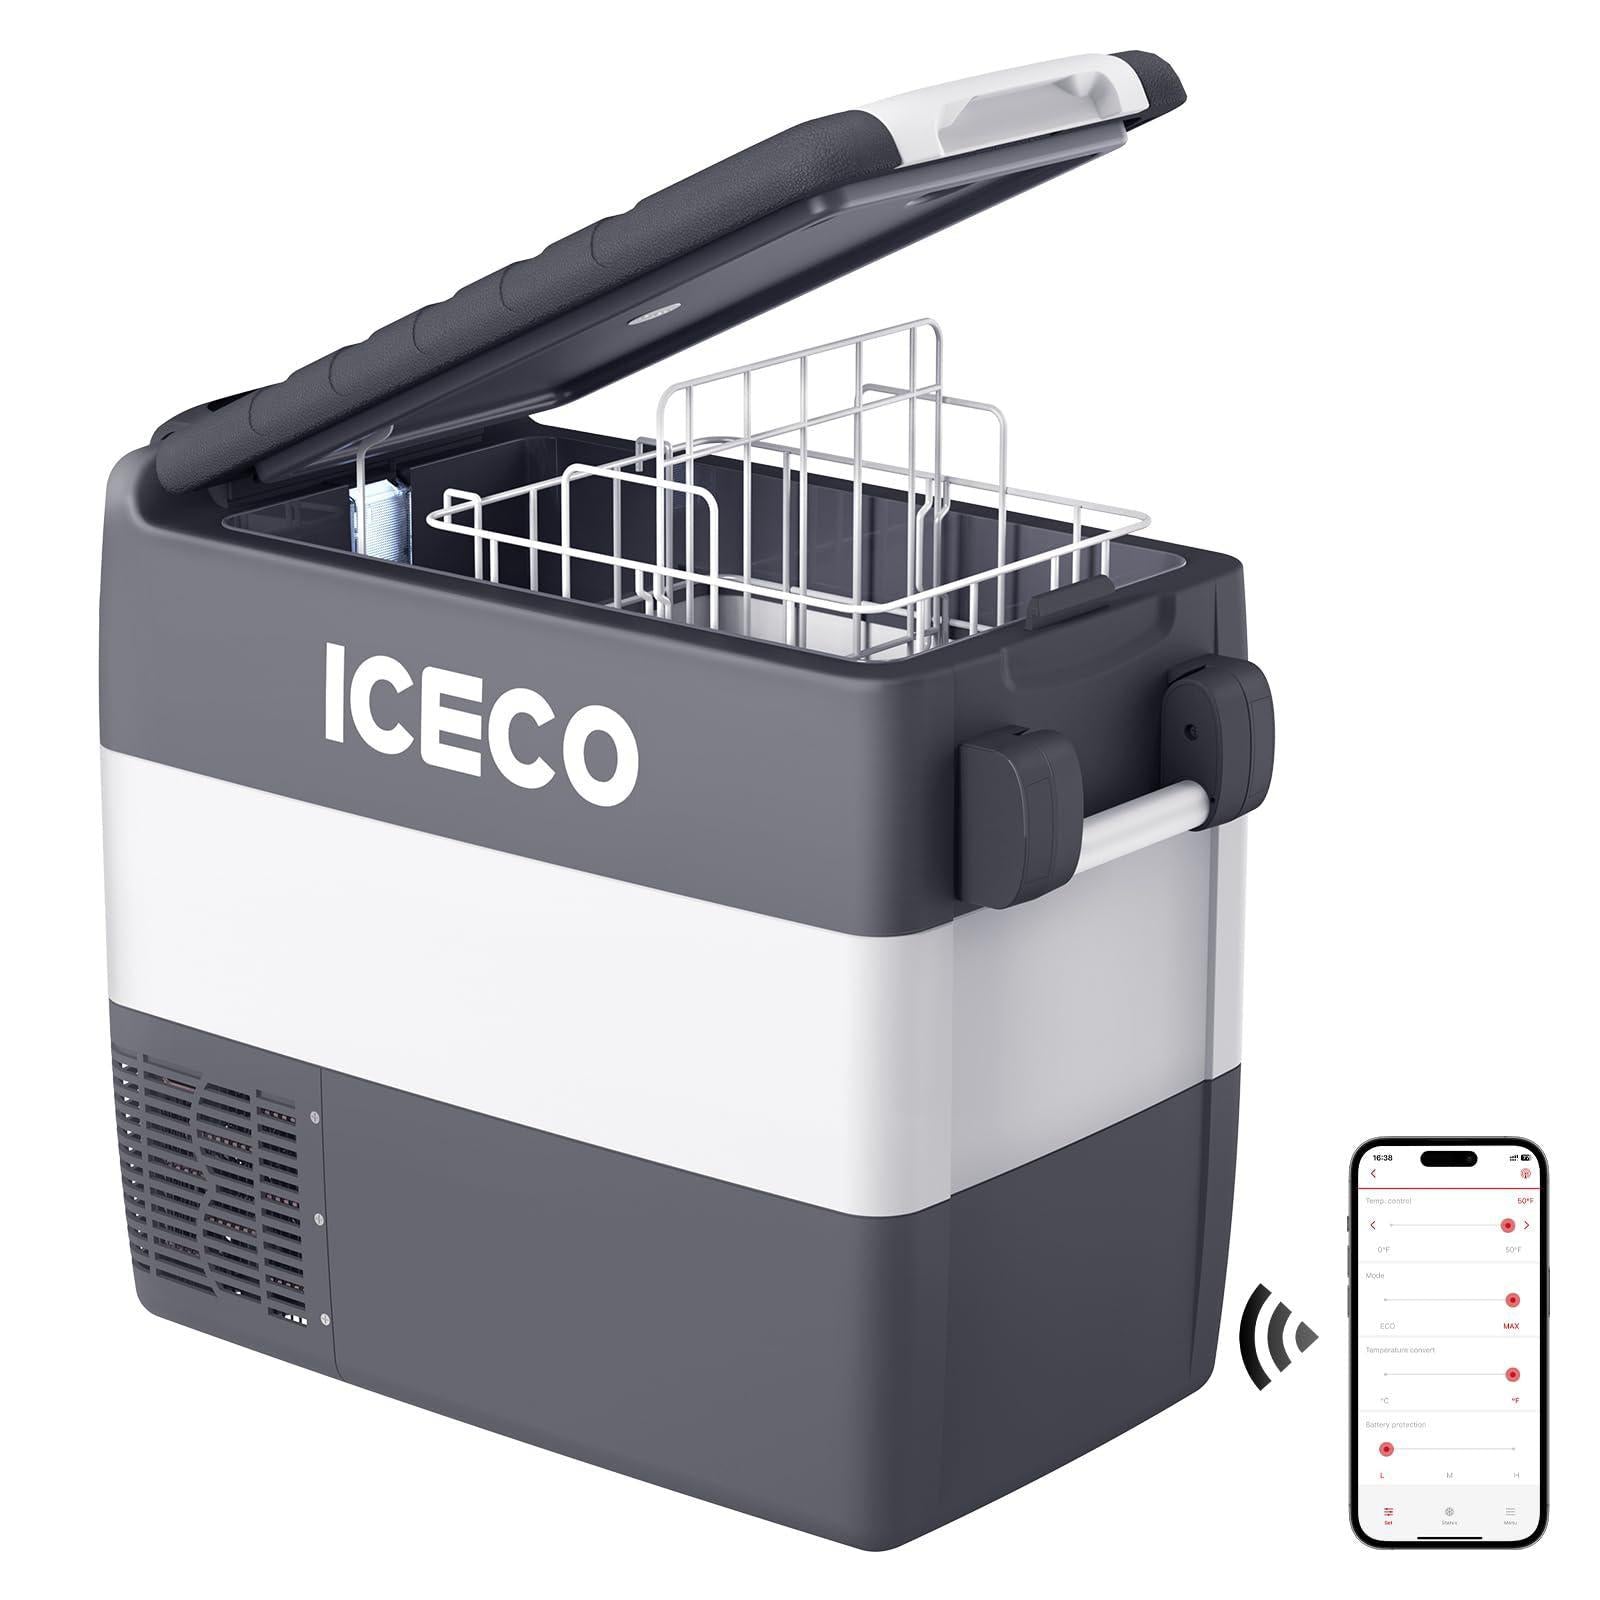 52.8QT JP50 12V APP Controlled Portable Fridge With Free Protective Cover-Portable Fridge-www.icecofreezer.com